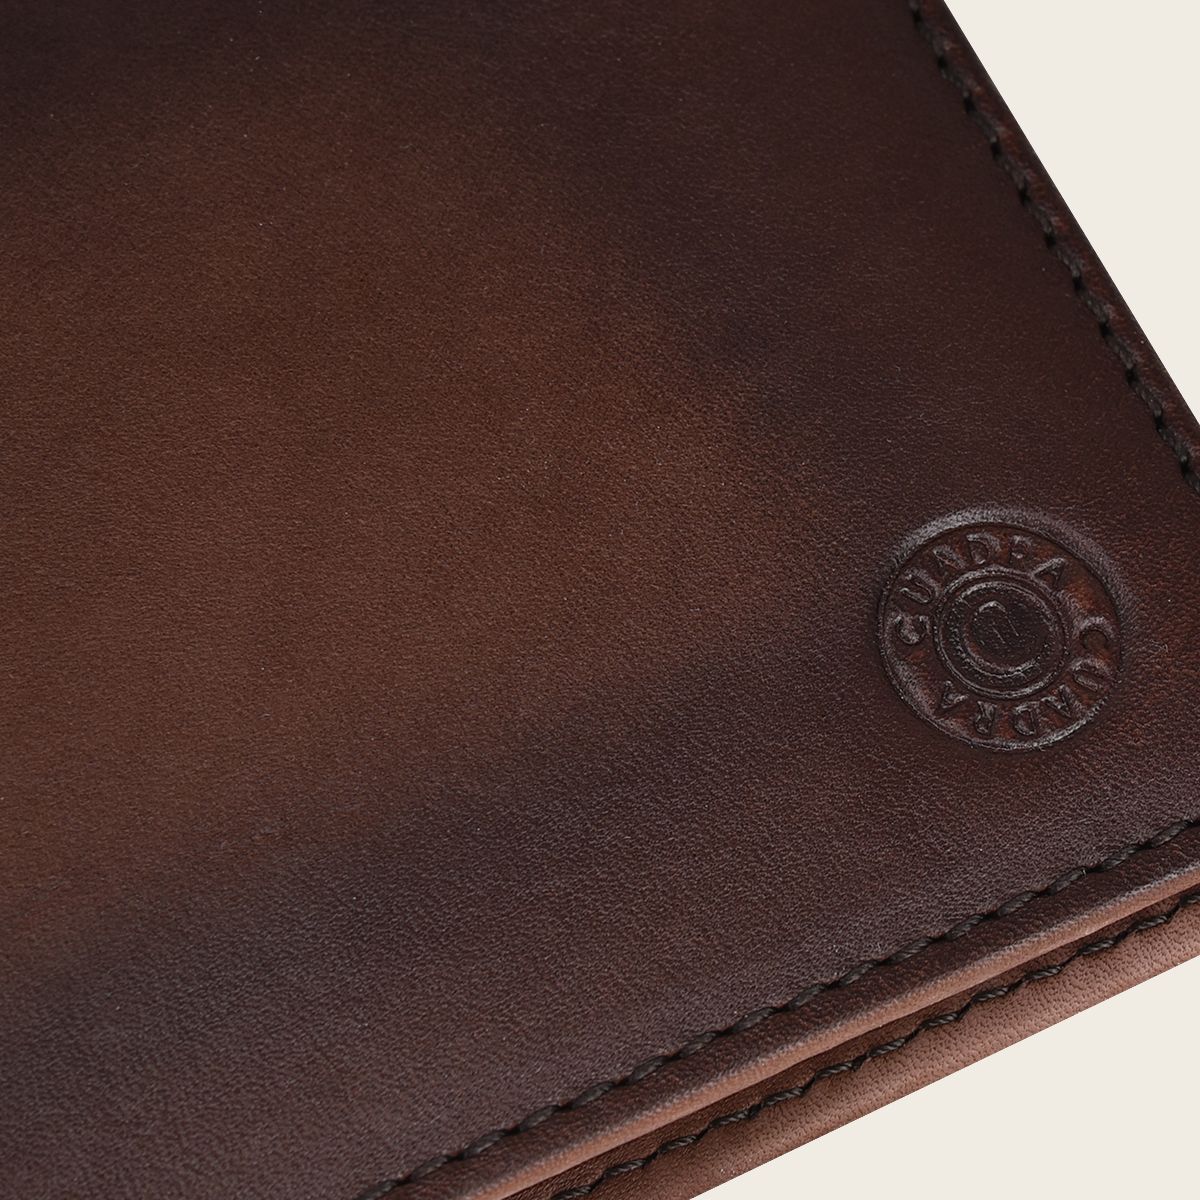 On the front, you'll notice a tasteful engraving of the Cuadra monogram, adding a touch of sophistication to your everyday accessory.